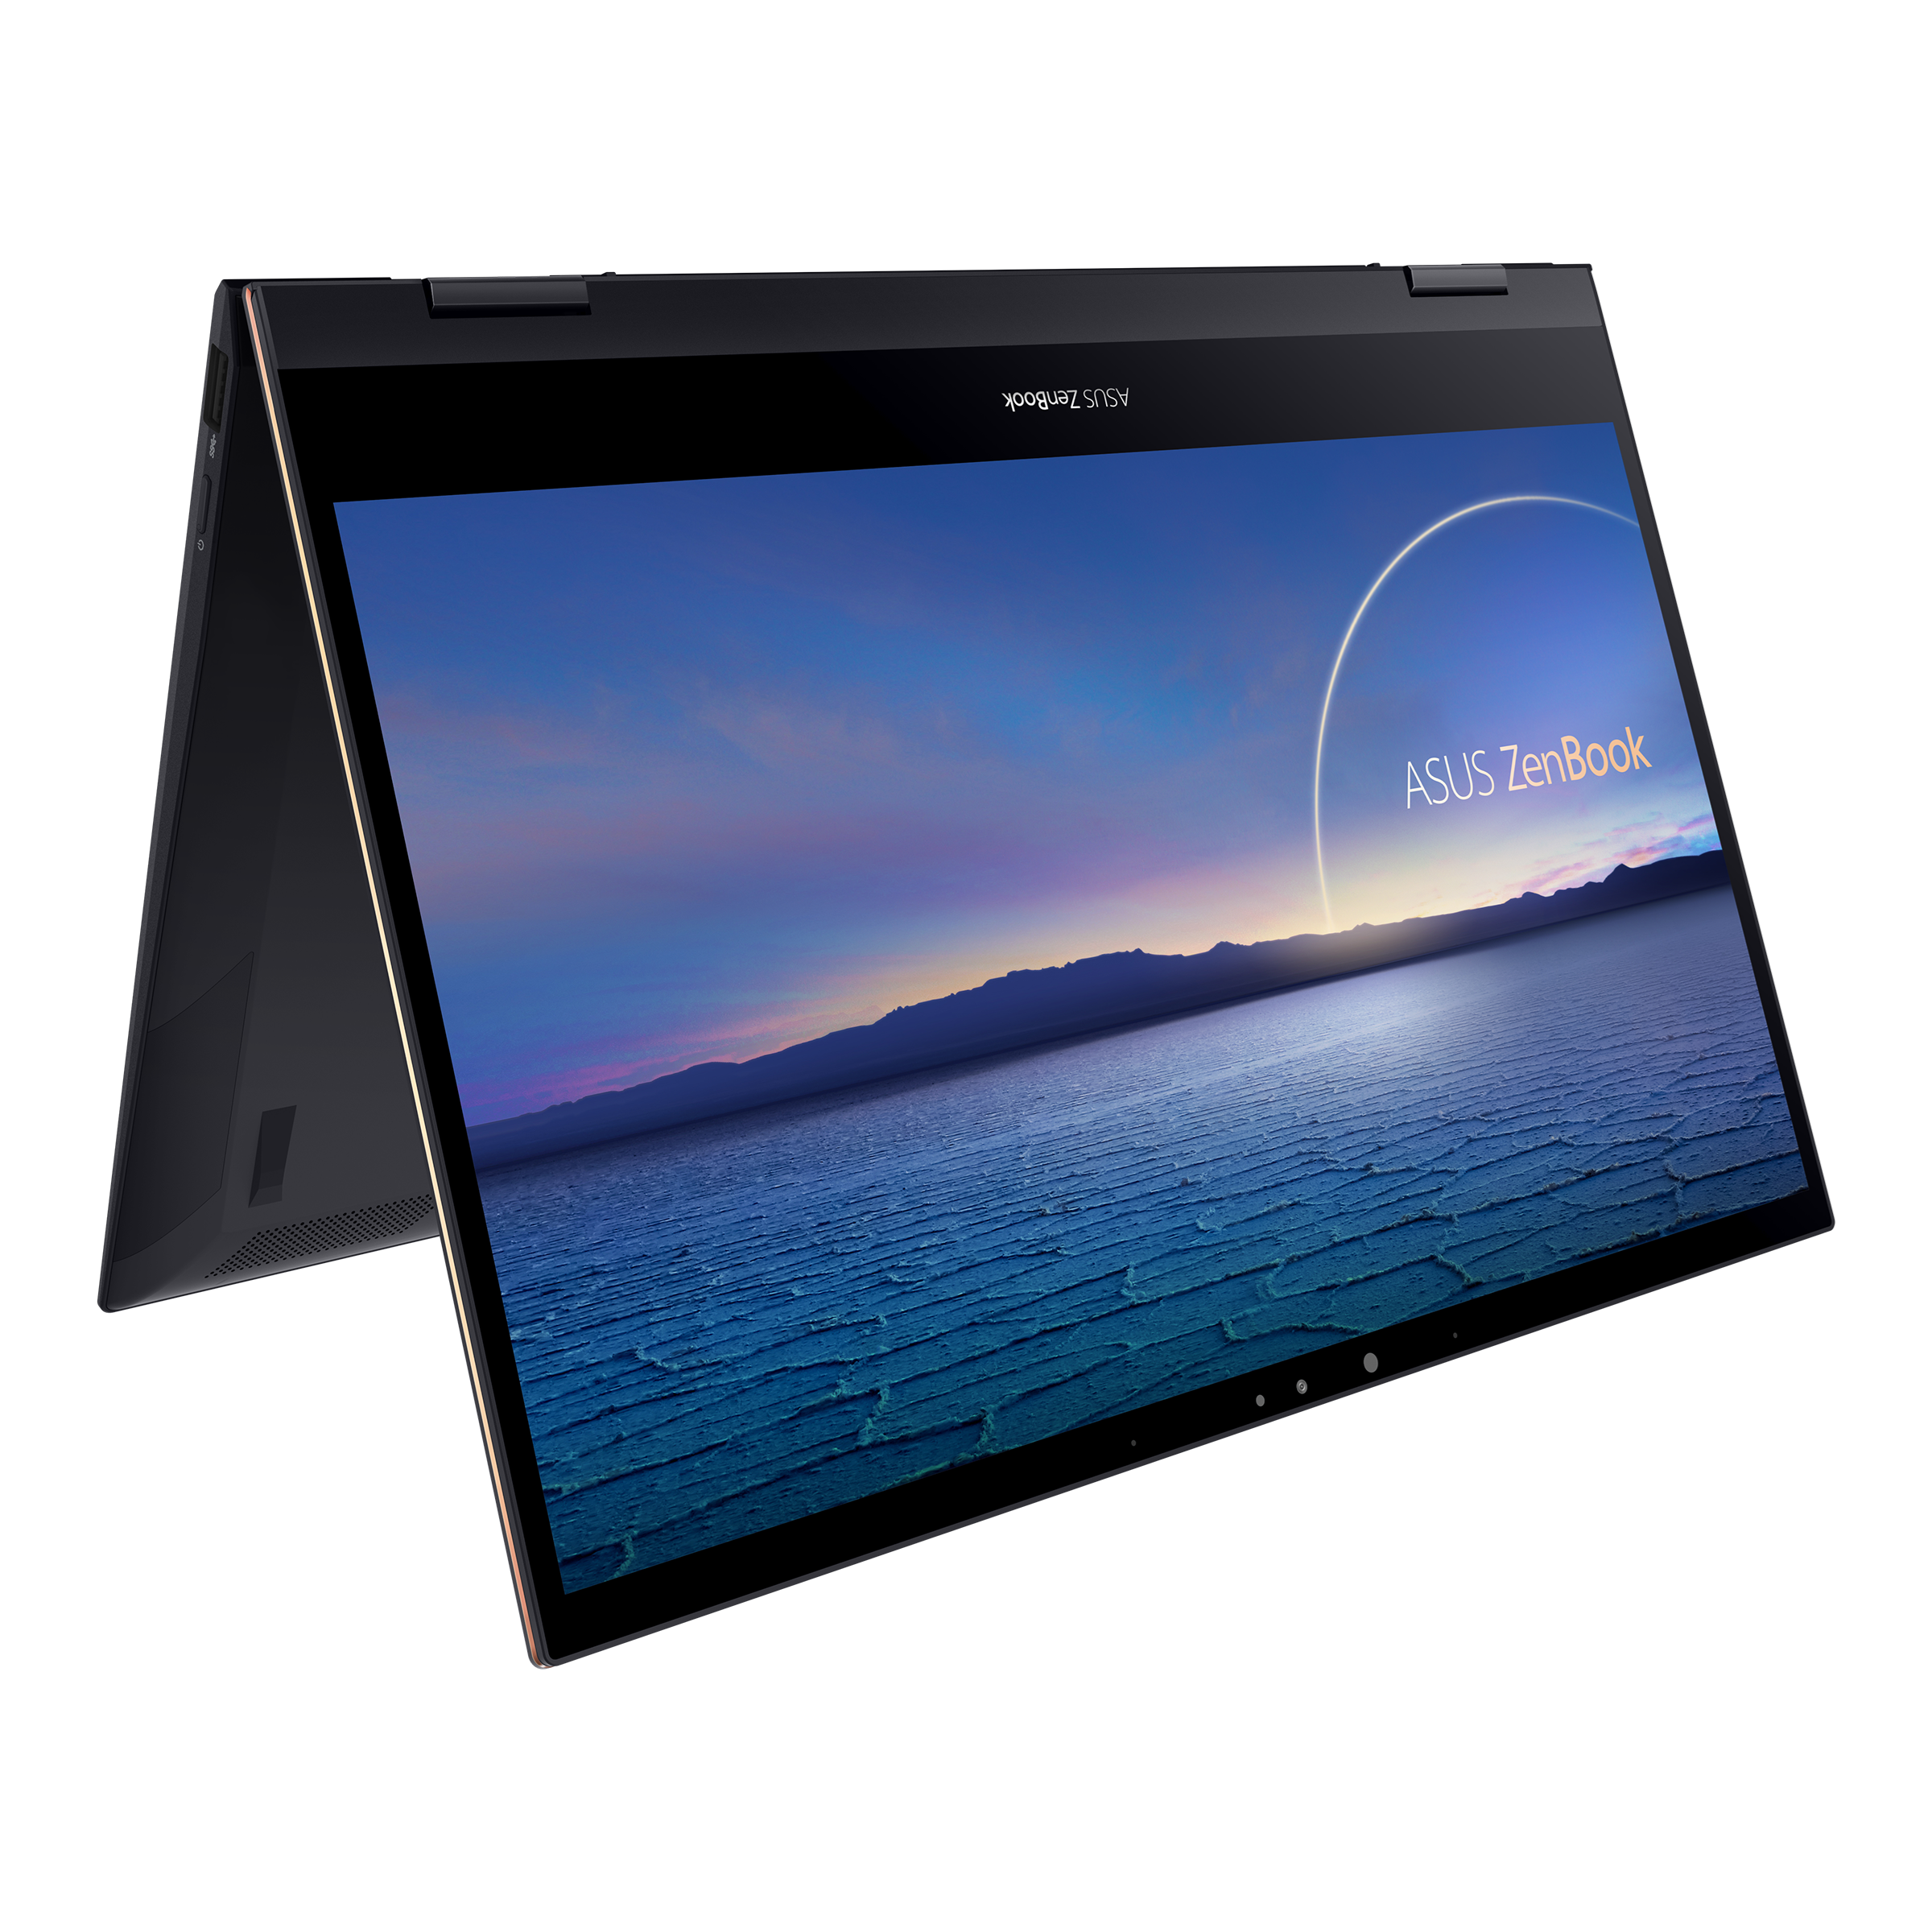 ASUS Zenbook Laptops｜Laptops For Home｜ASUS USA